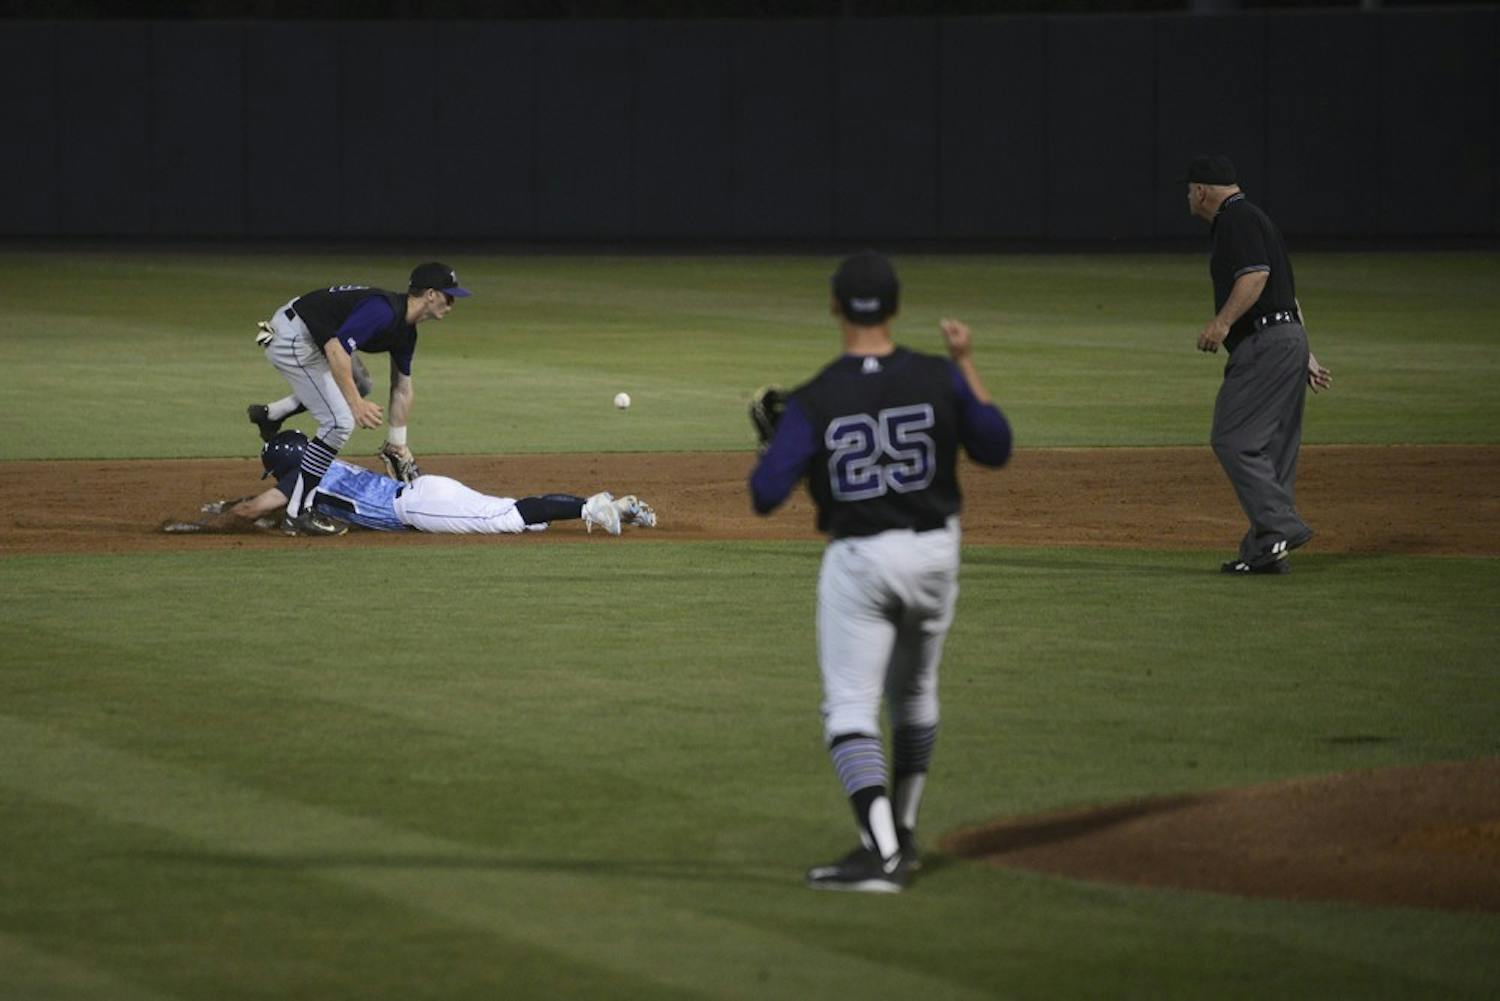 UNC sophomore Tyler Ramirez (14) safely steals second after knocking the ball lose in Tuesday's game against High Point.